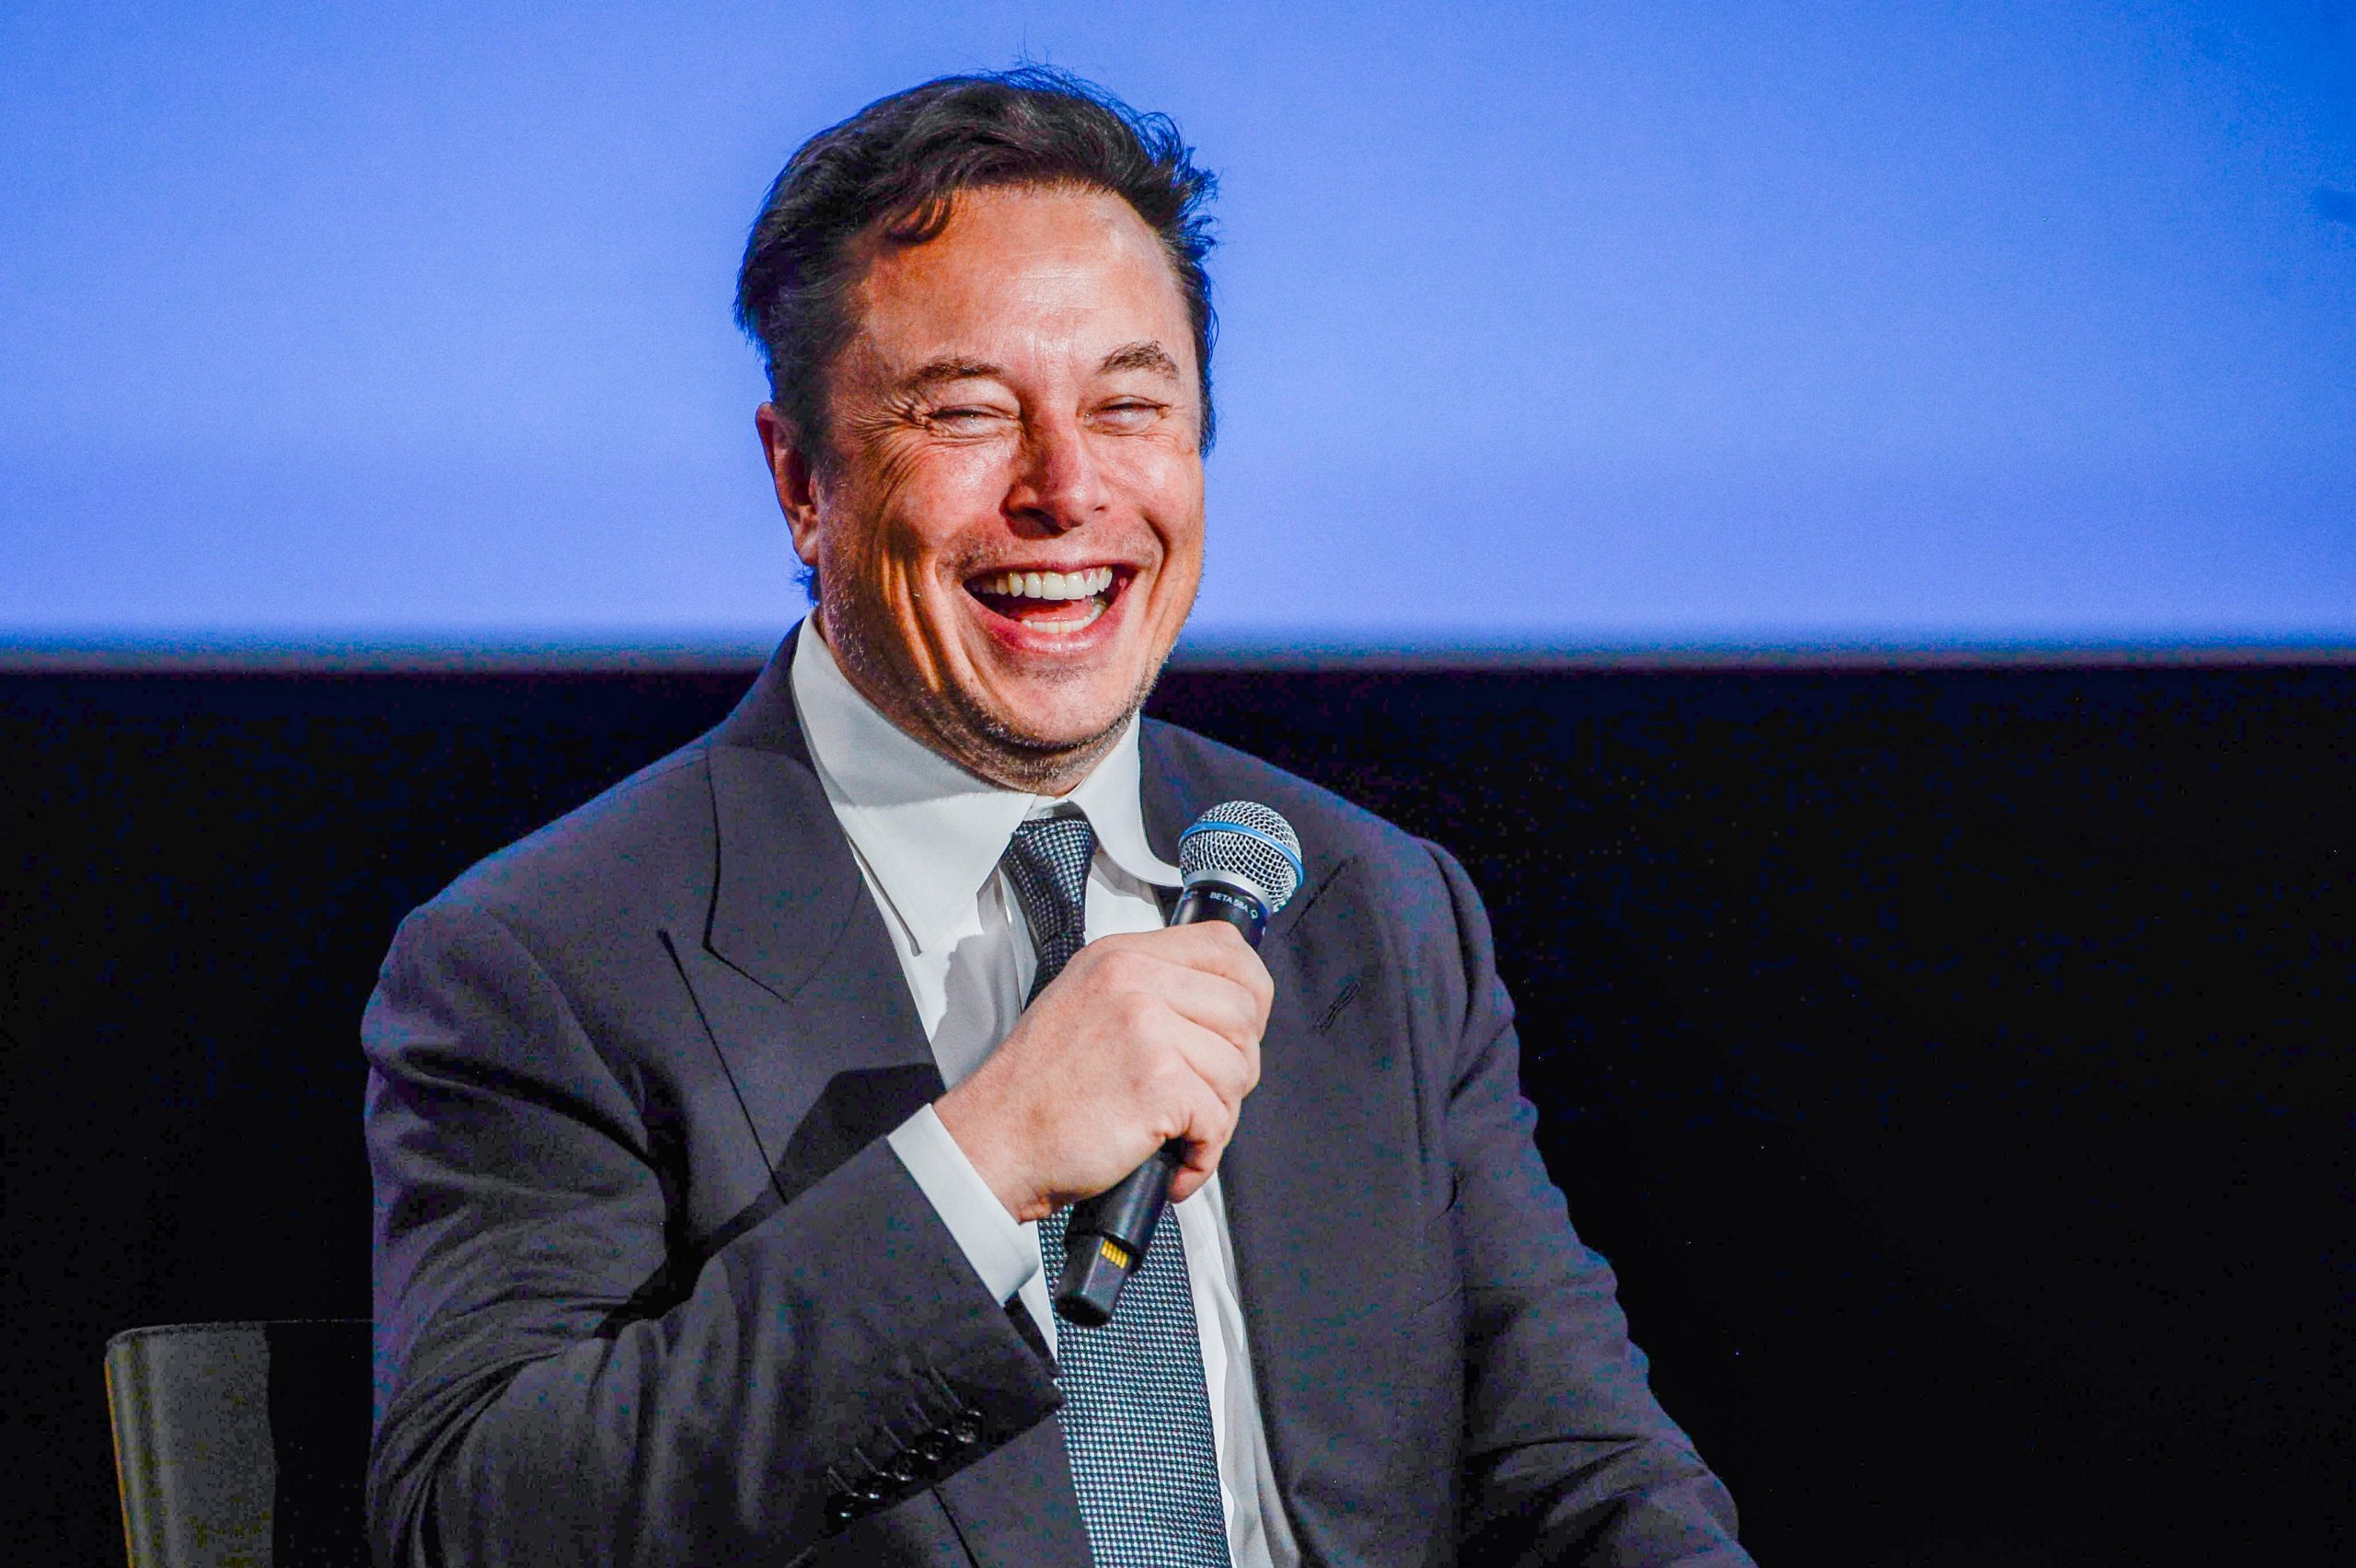 ‘The bird is freed’: Elon Musk’s cryptic post confirming Twitter takeover